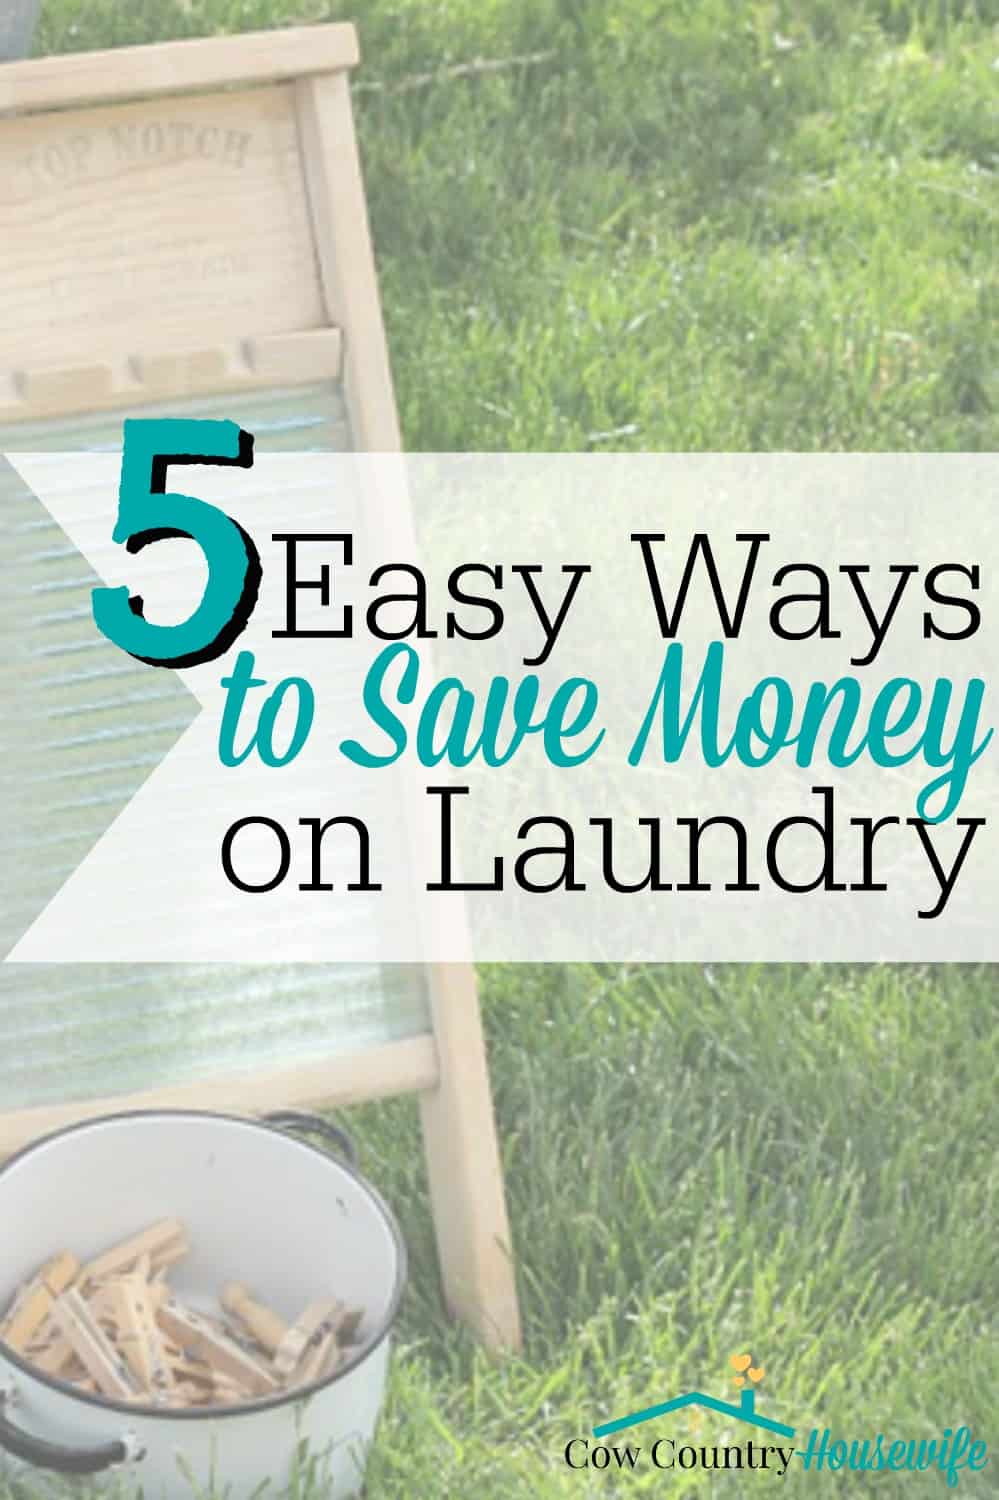 Looking to save money on your laundry? Trying to get rid of chemicals in your house? Seriously, these are the easiest ways ever to cut back or almost completely get rid of your laundry spending. This is all coming from the woman who hasn't spent any money on laundry in a year for a family of five!